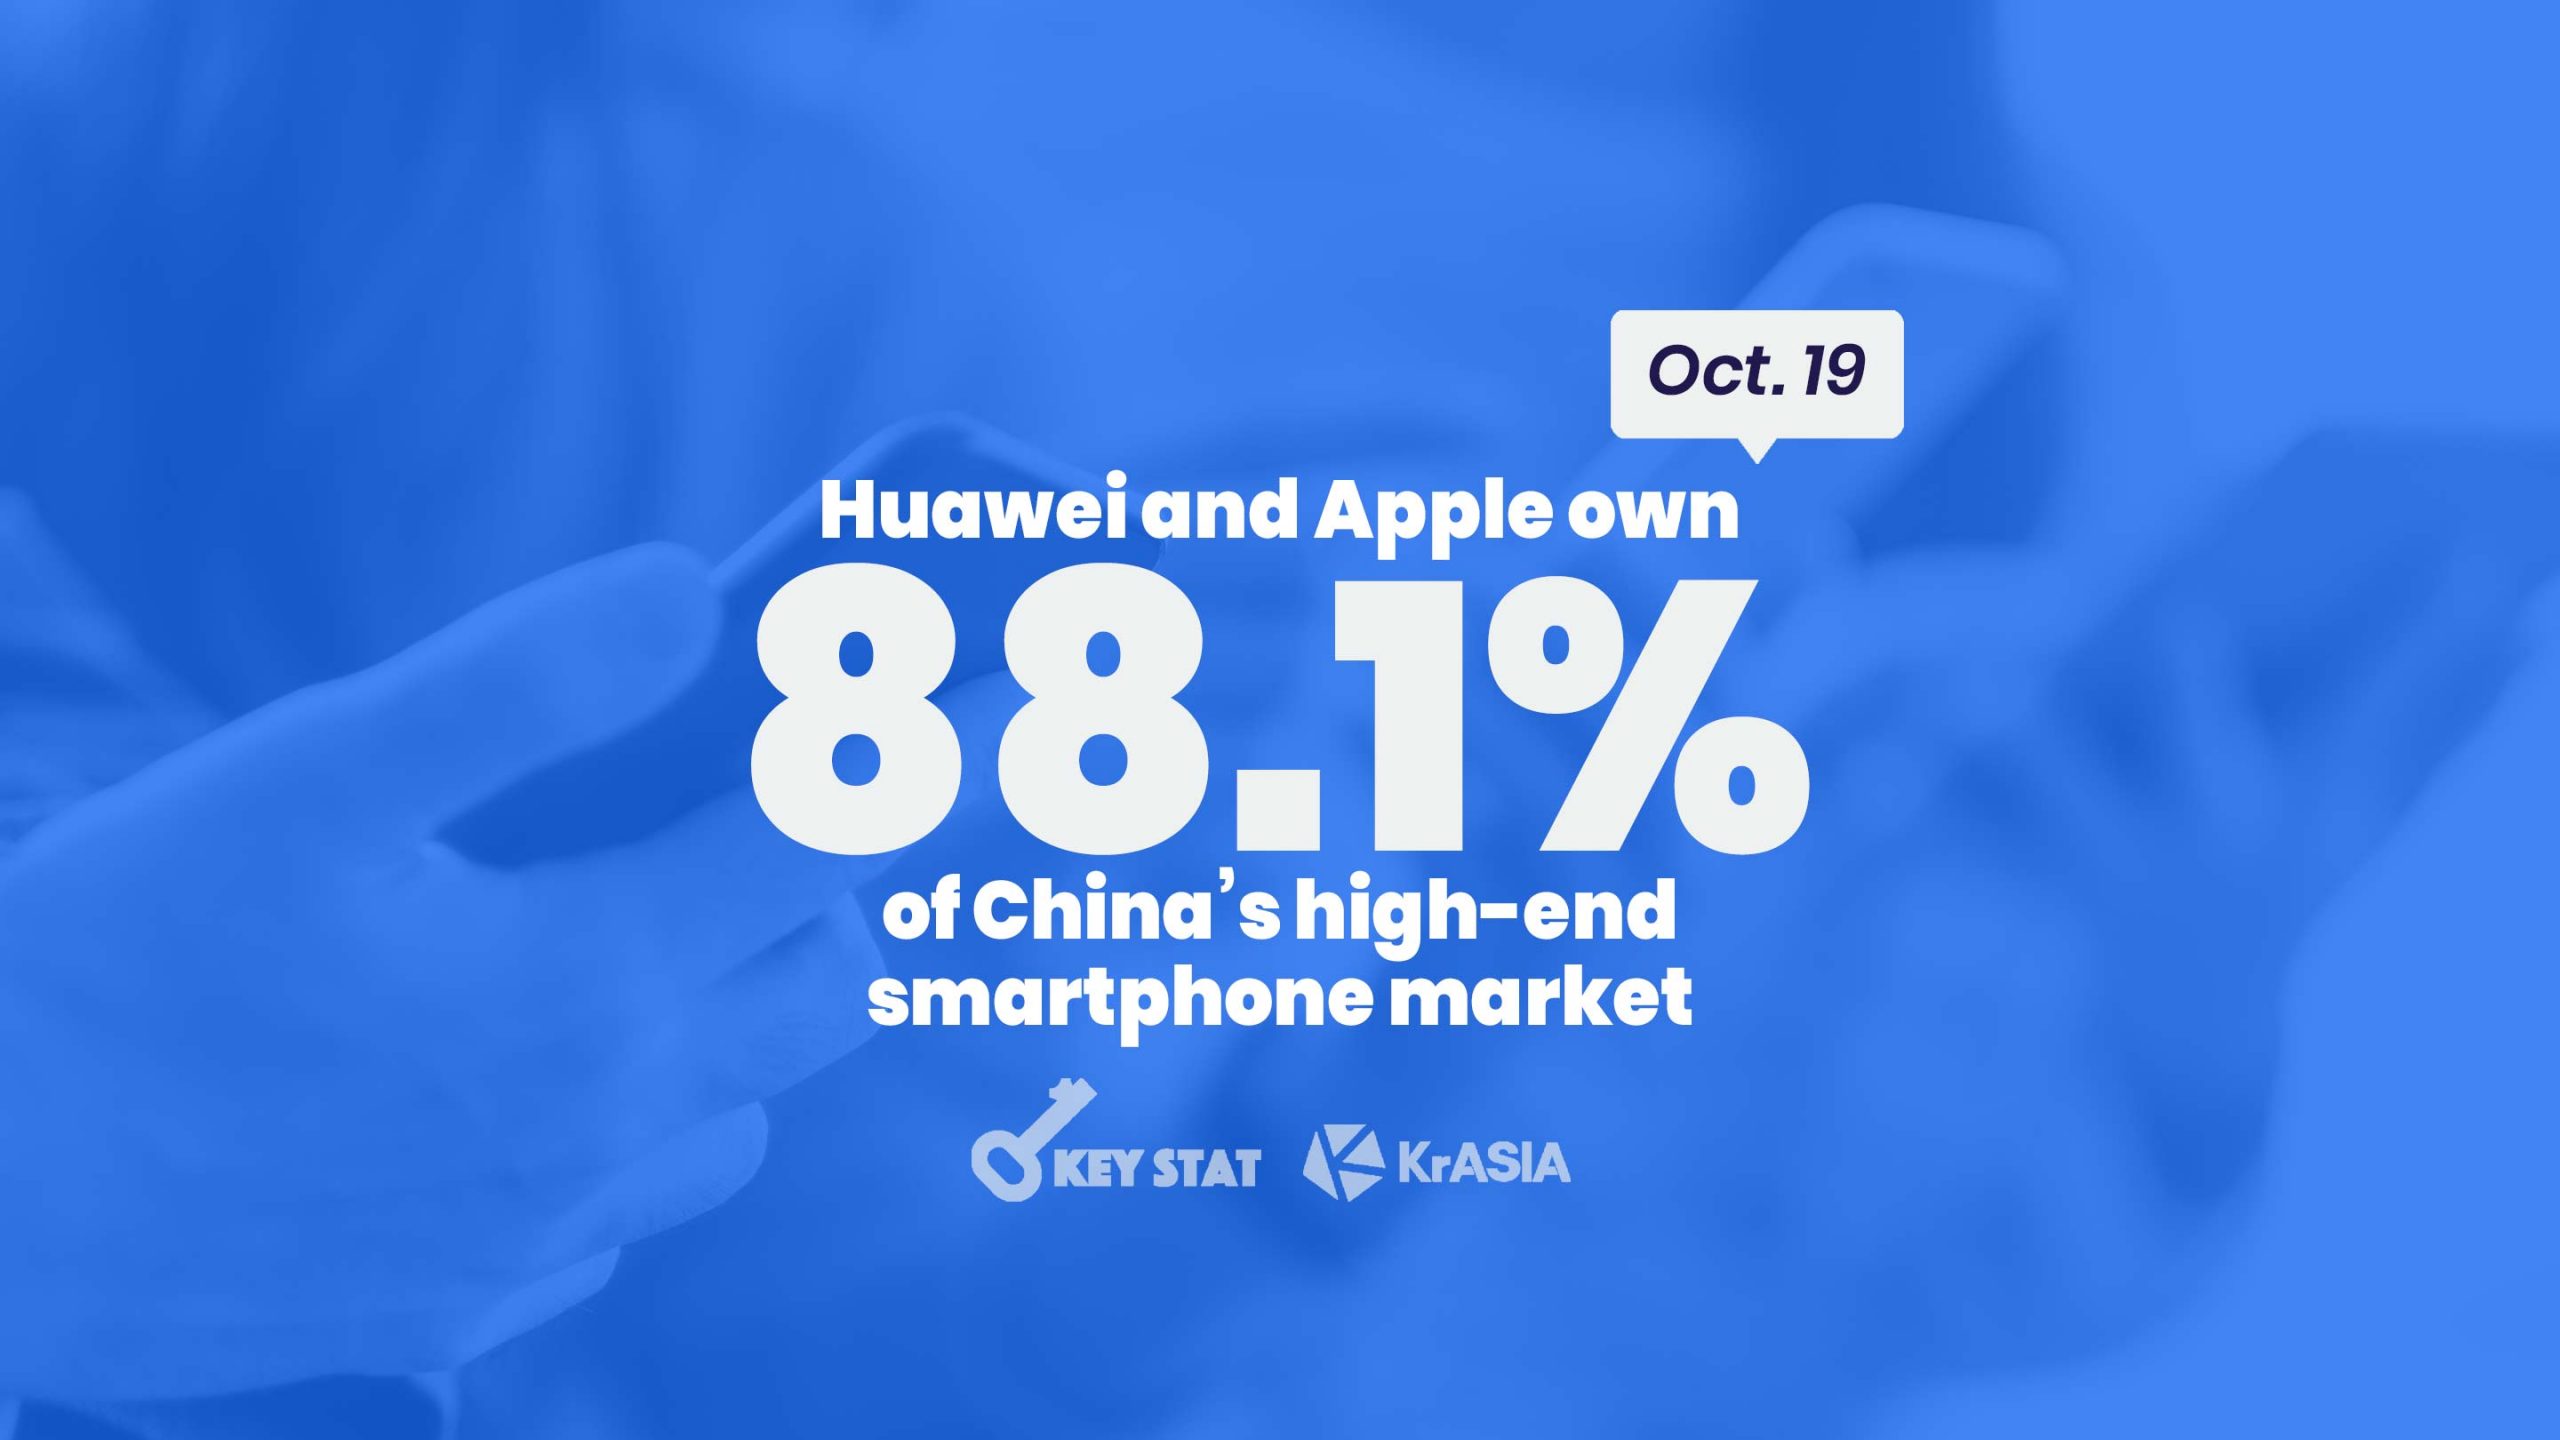 KEY STAT | Huawei and Apple own 88% of China’s high-end smartphone market